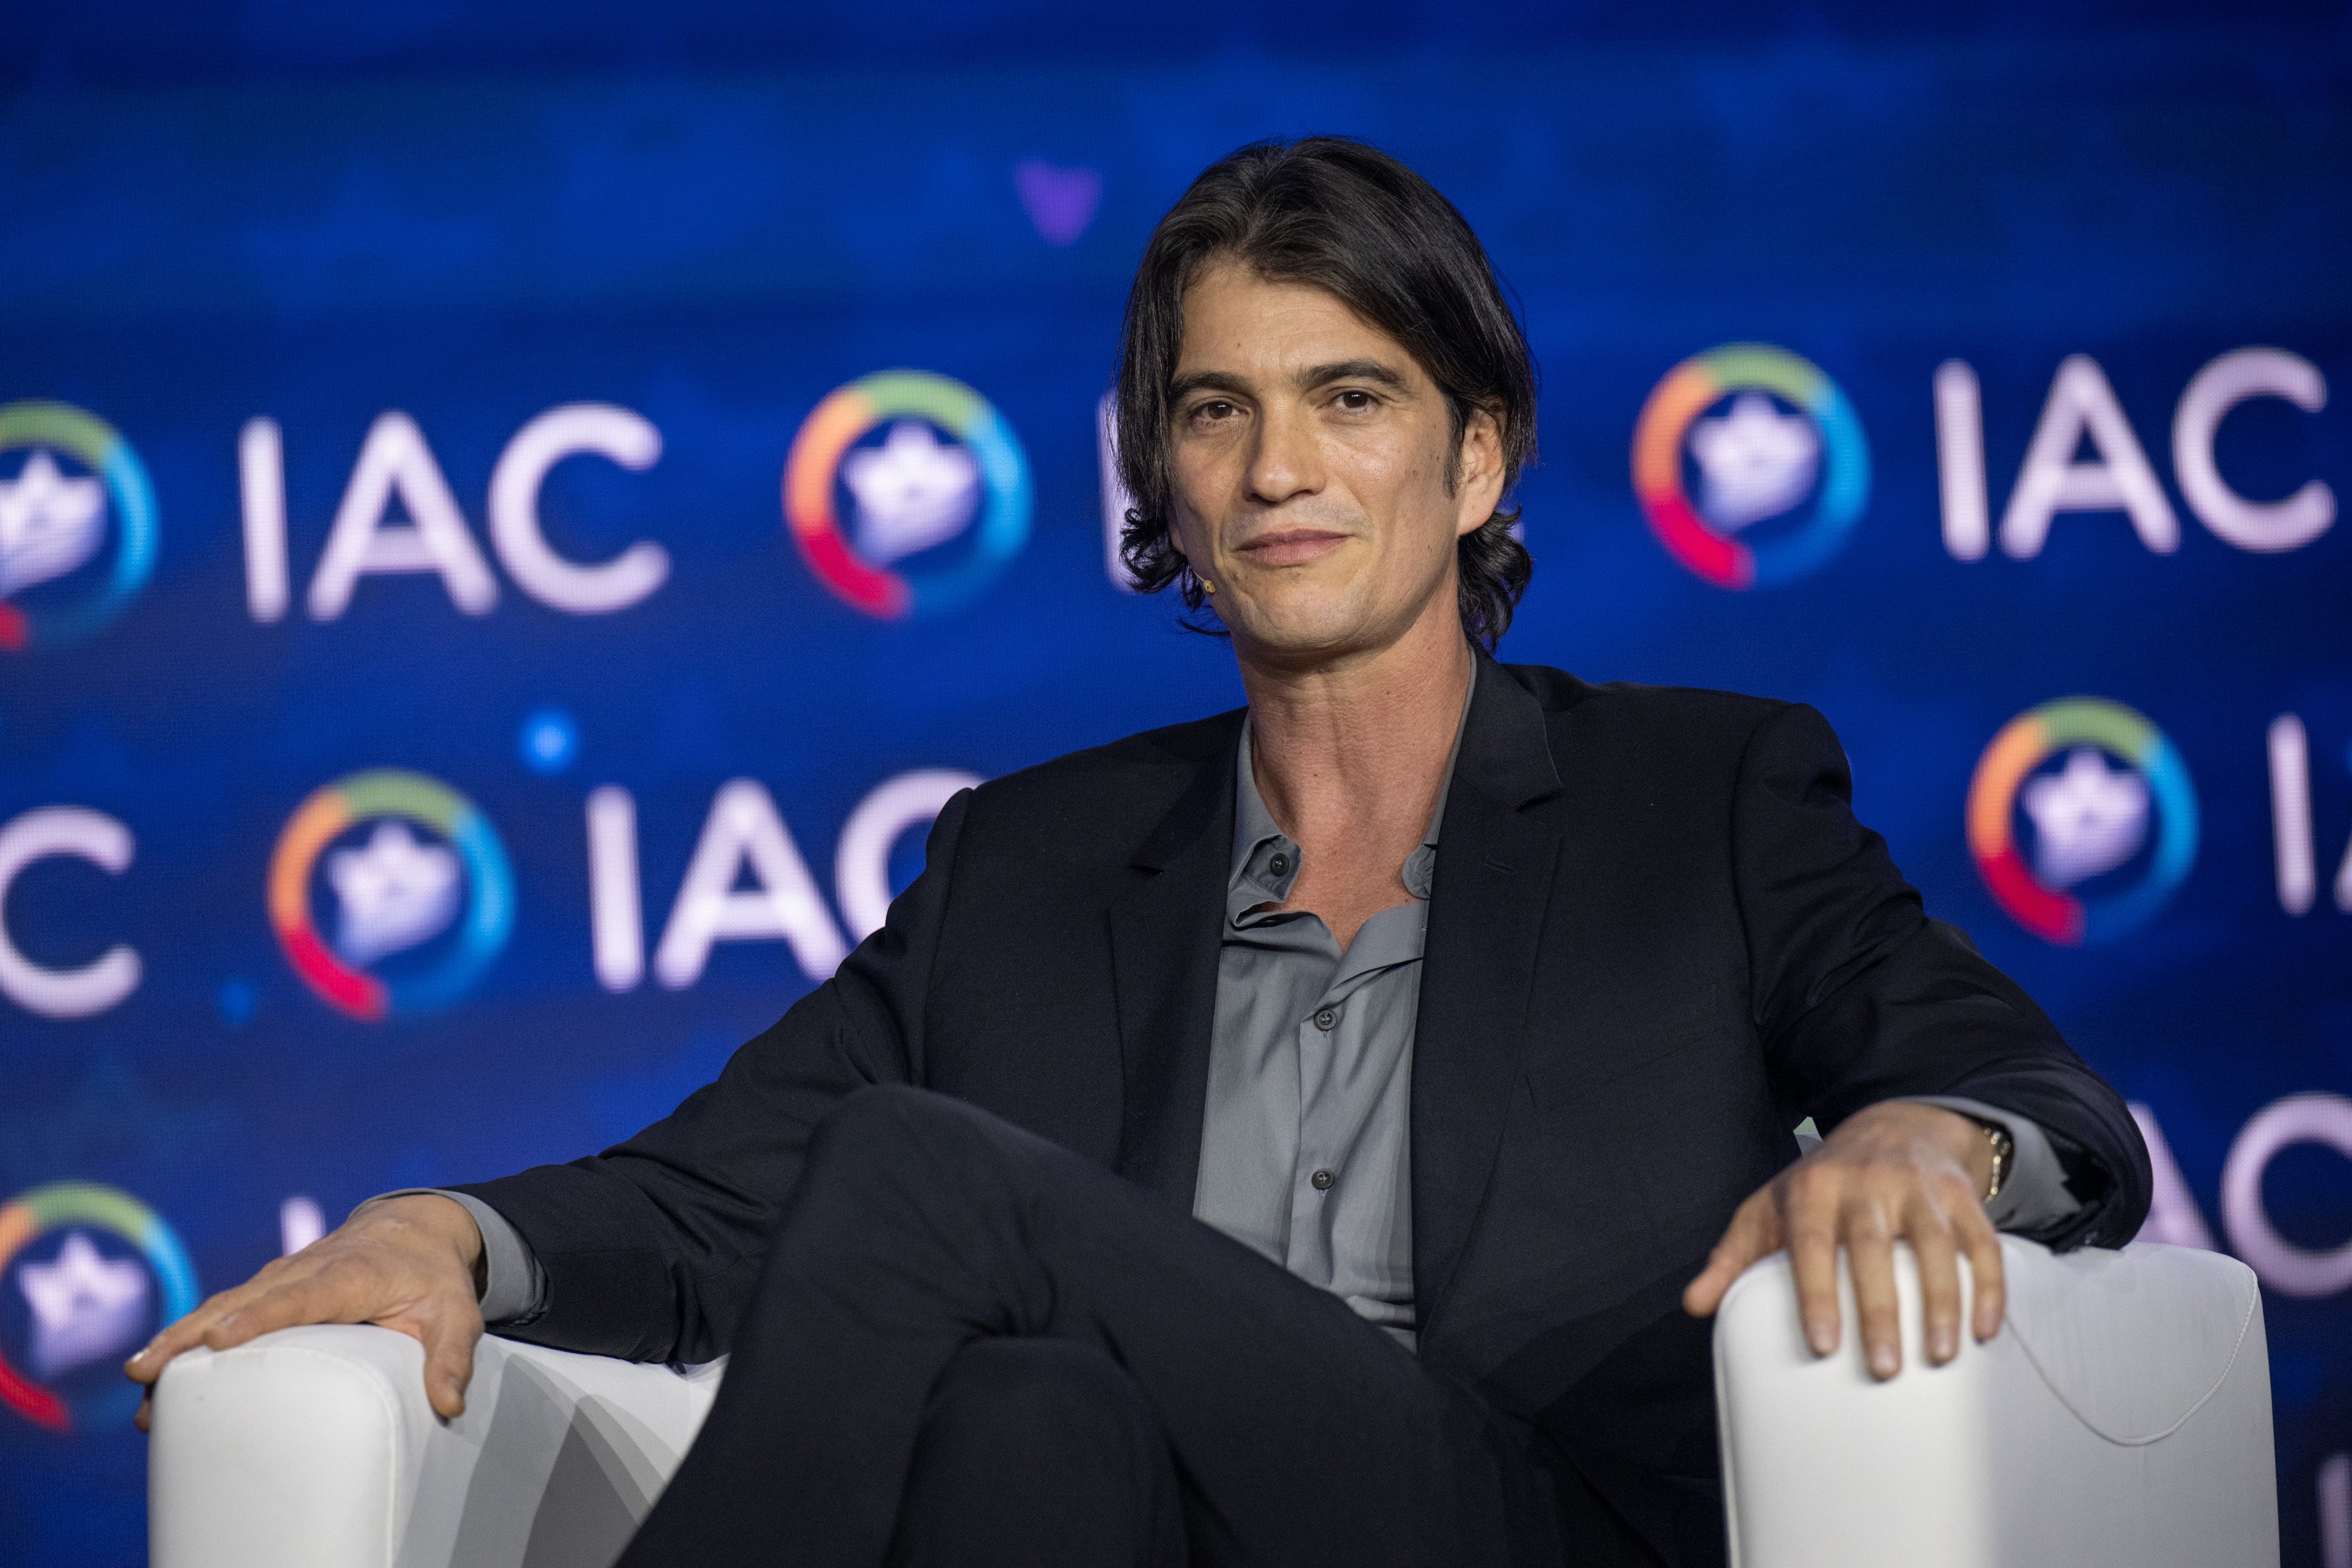 Israeli-American billionaire businessman Adam Neumann – who co-founded WeWork in 2010 before being ousted as CEO in 2019 – is trying to buy back the business. Photo: Getty Images